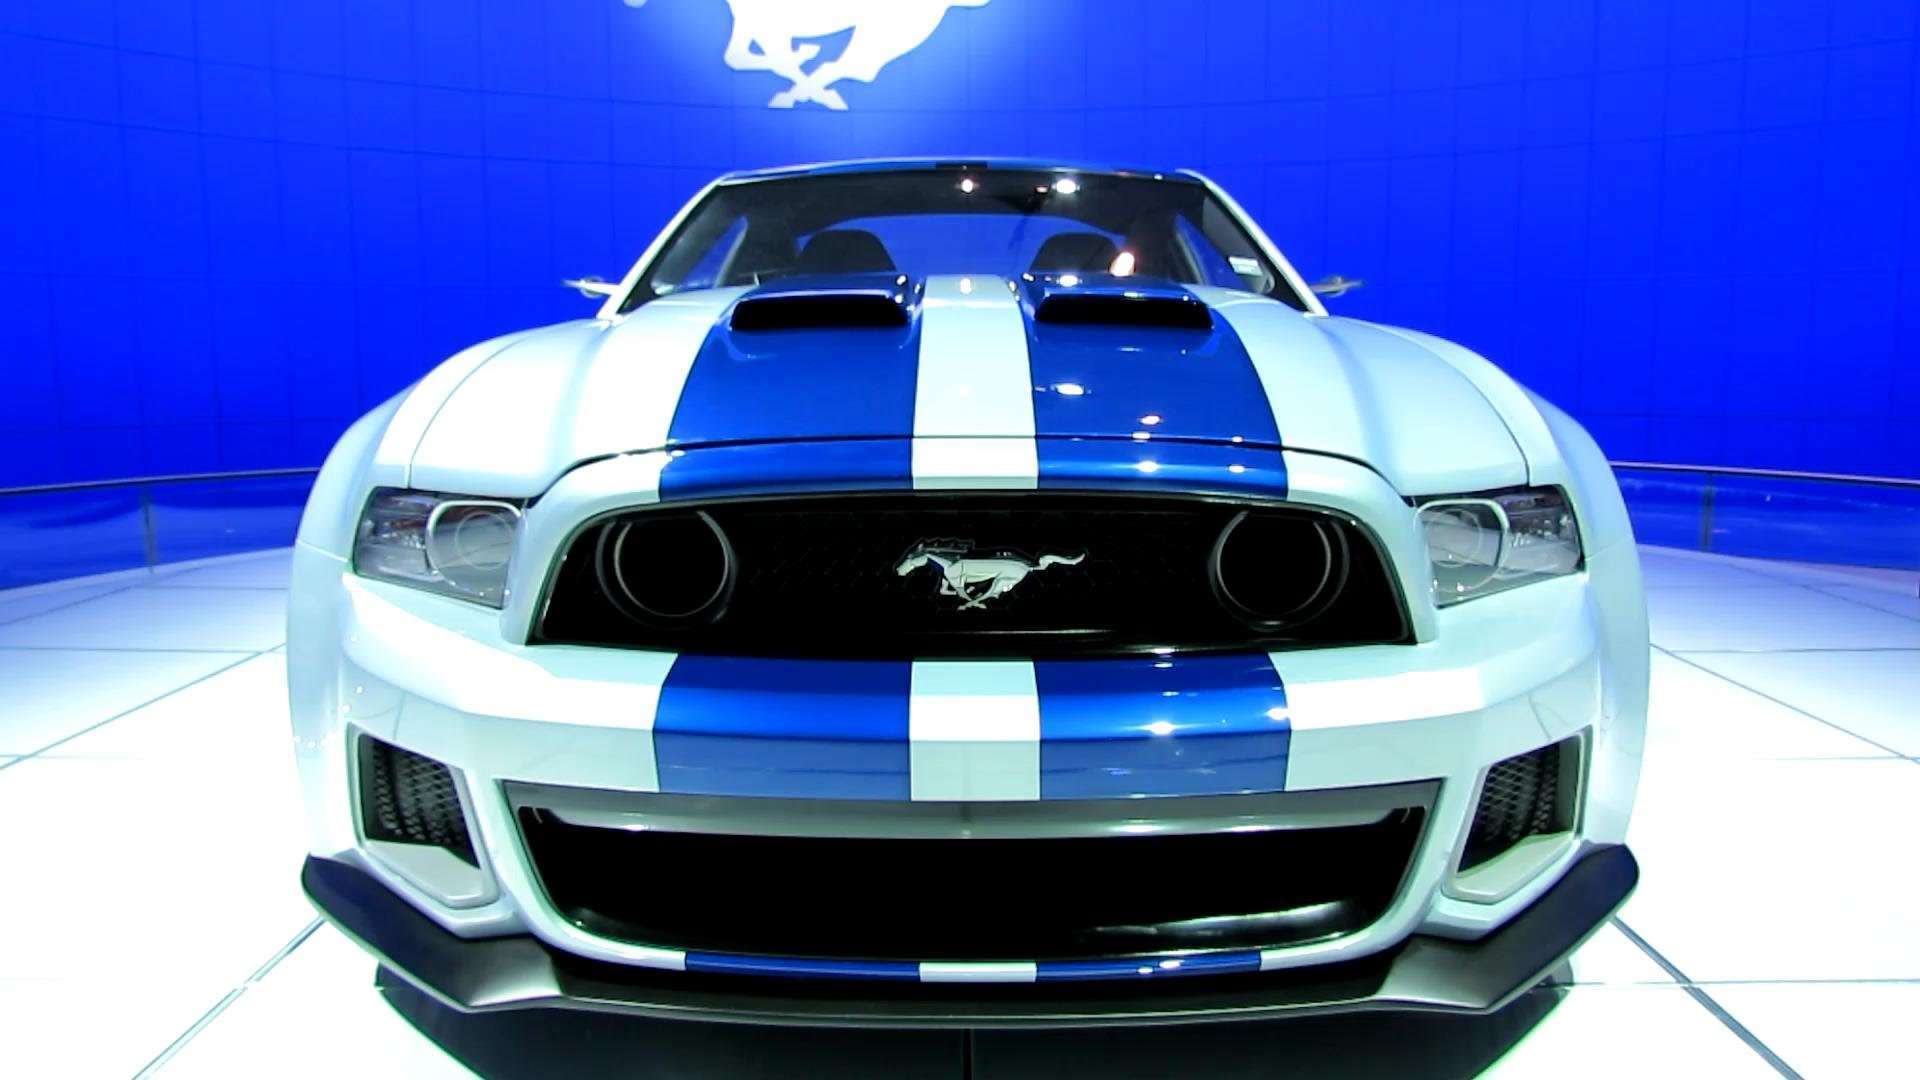 Wallpaper Need For Speed Mustang HD 1080p Upload At May